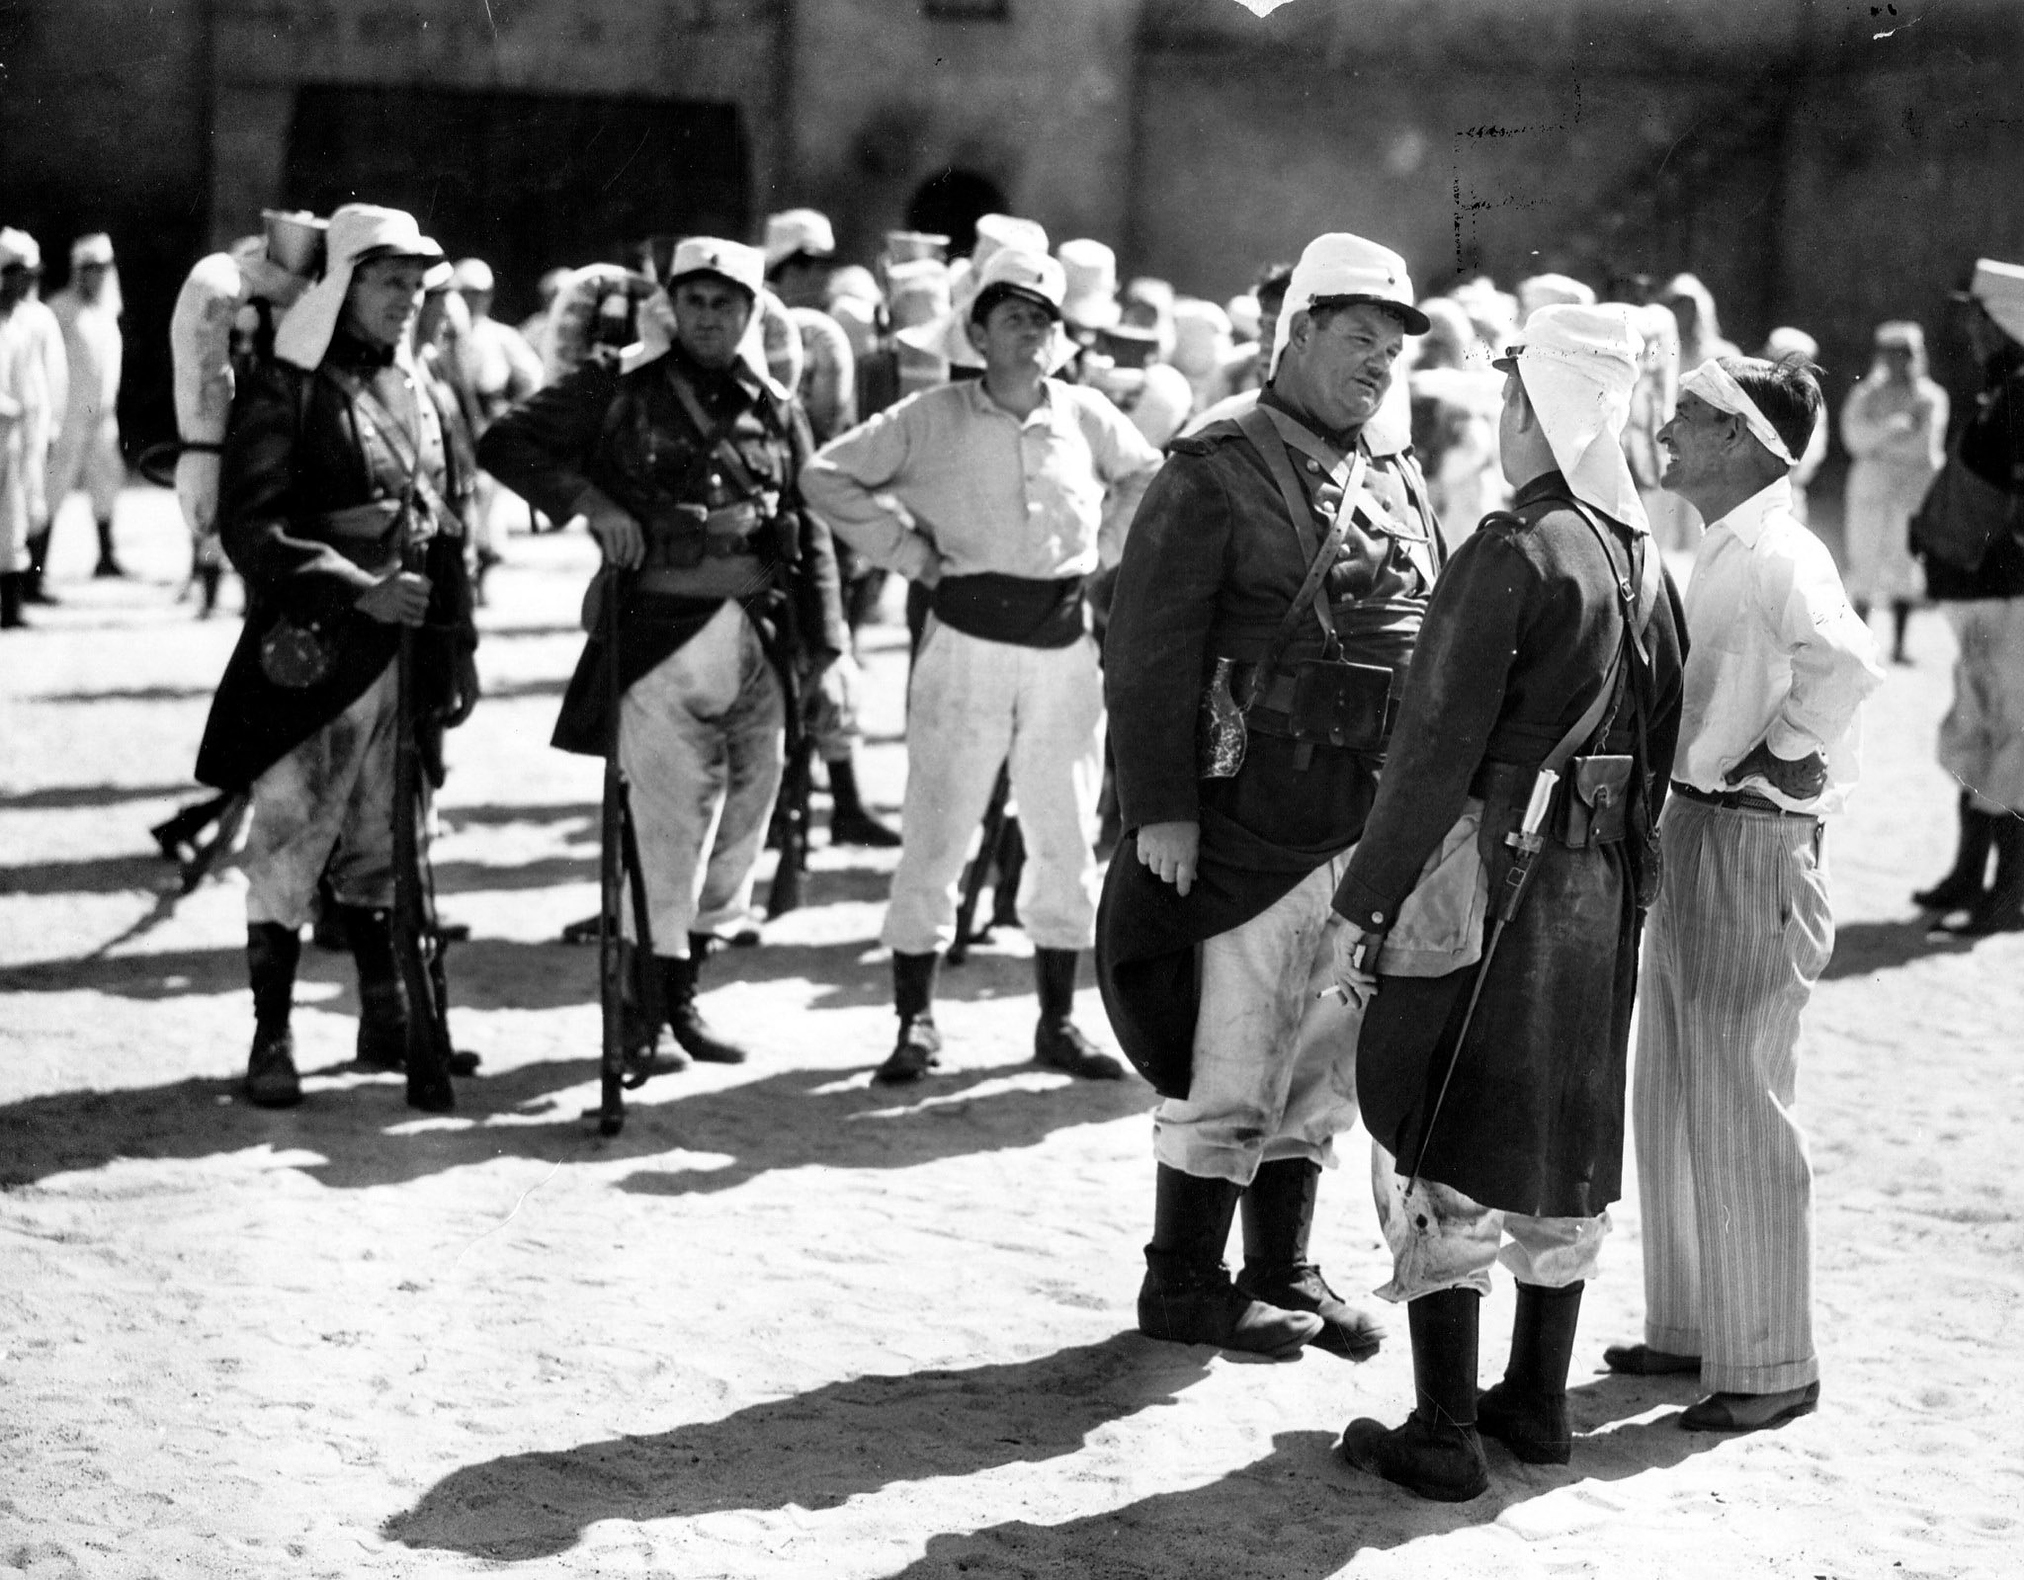 Laurel and Hardy star in 'Beau Hunks' the latest Hal Roach comedy about the Foreign Legion. The director James Horne is discussing with them how he wants the scene played, 1931.